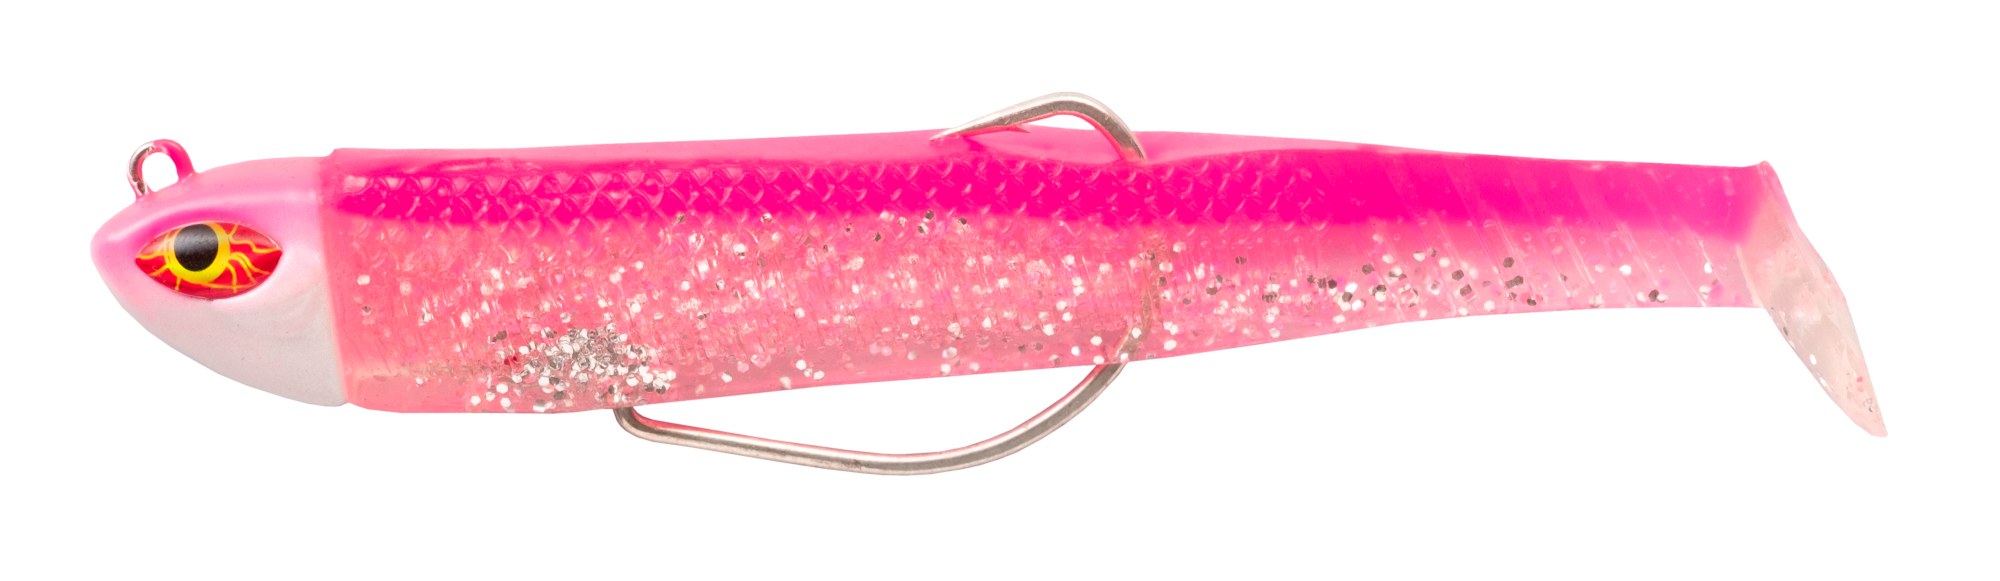 Cinnetic Crafty Candy Shad 10.5cm (25g) (2 pieces) - Electric Pink